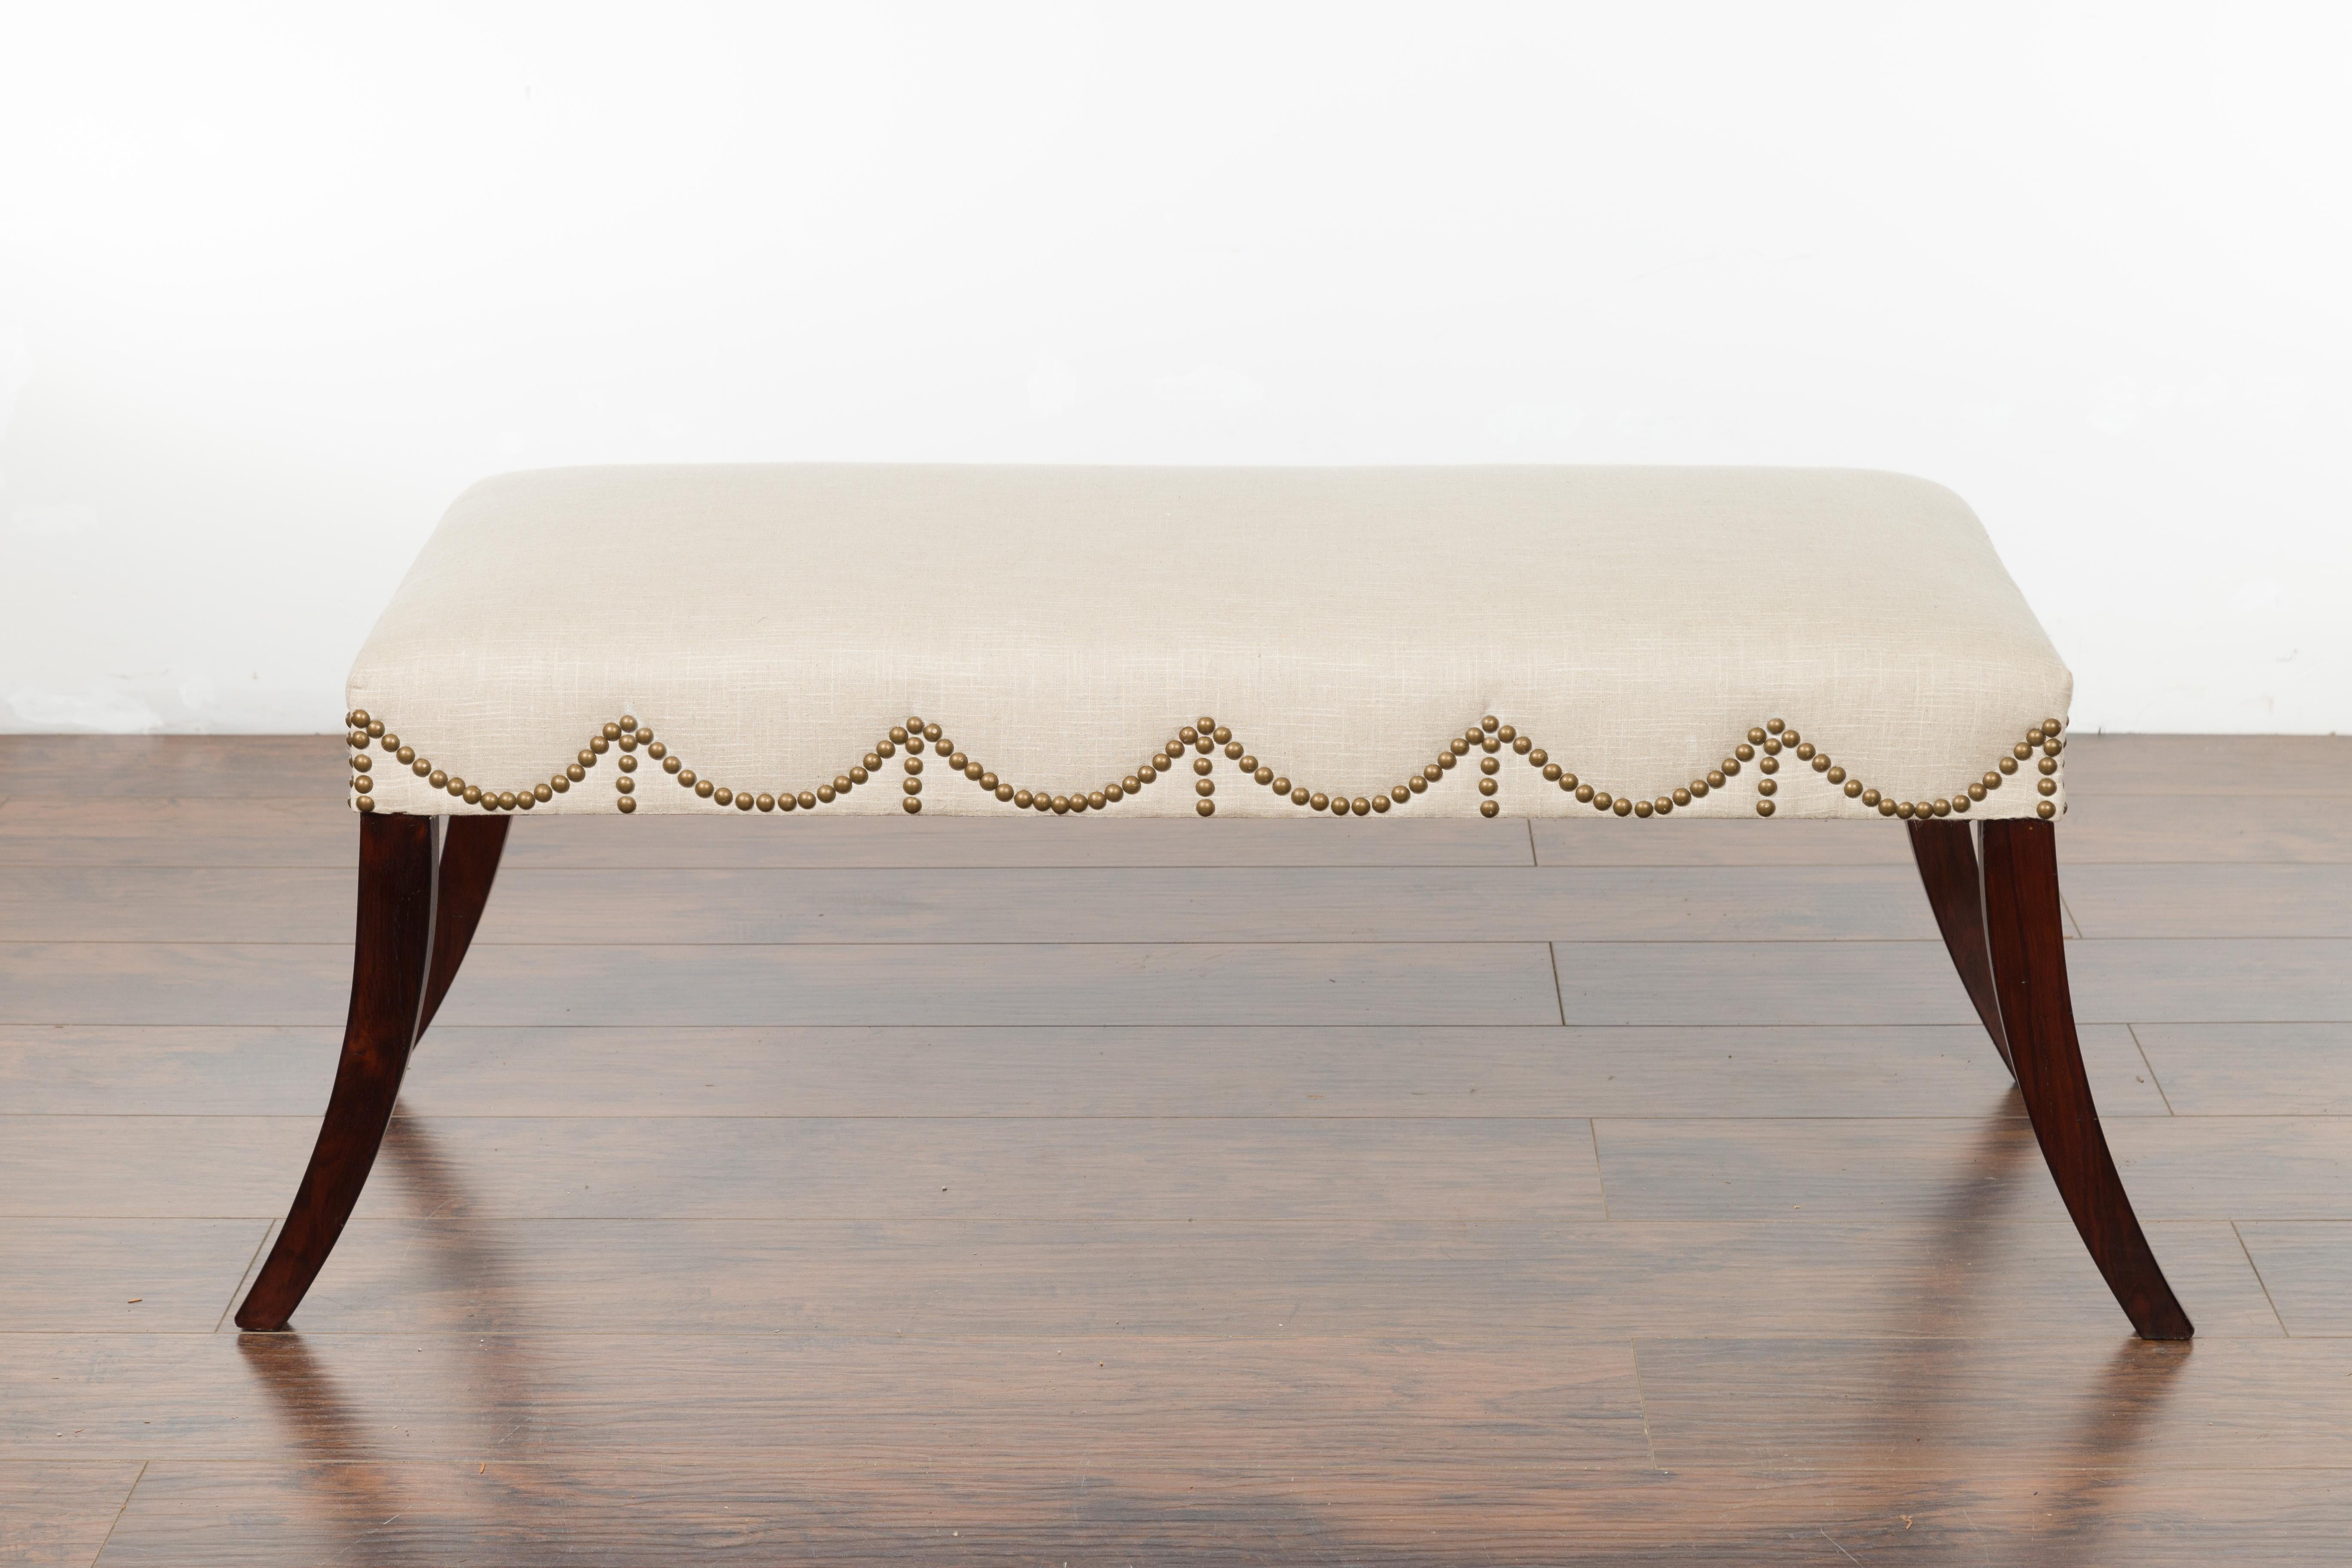 English 1820s Regency Period Wooden Bench with Saber Legs and New Upholstery In Good Condition For Sale In Atlanta, GA